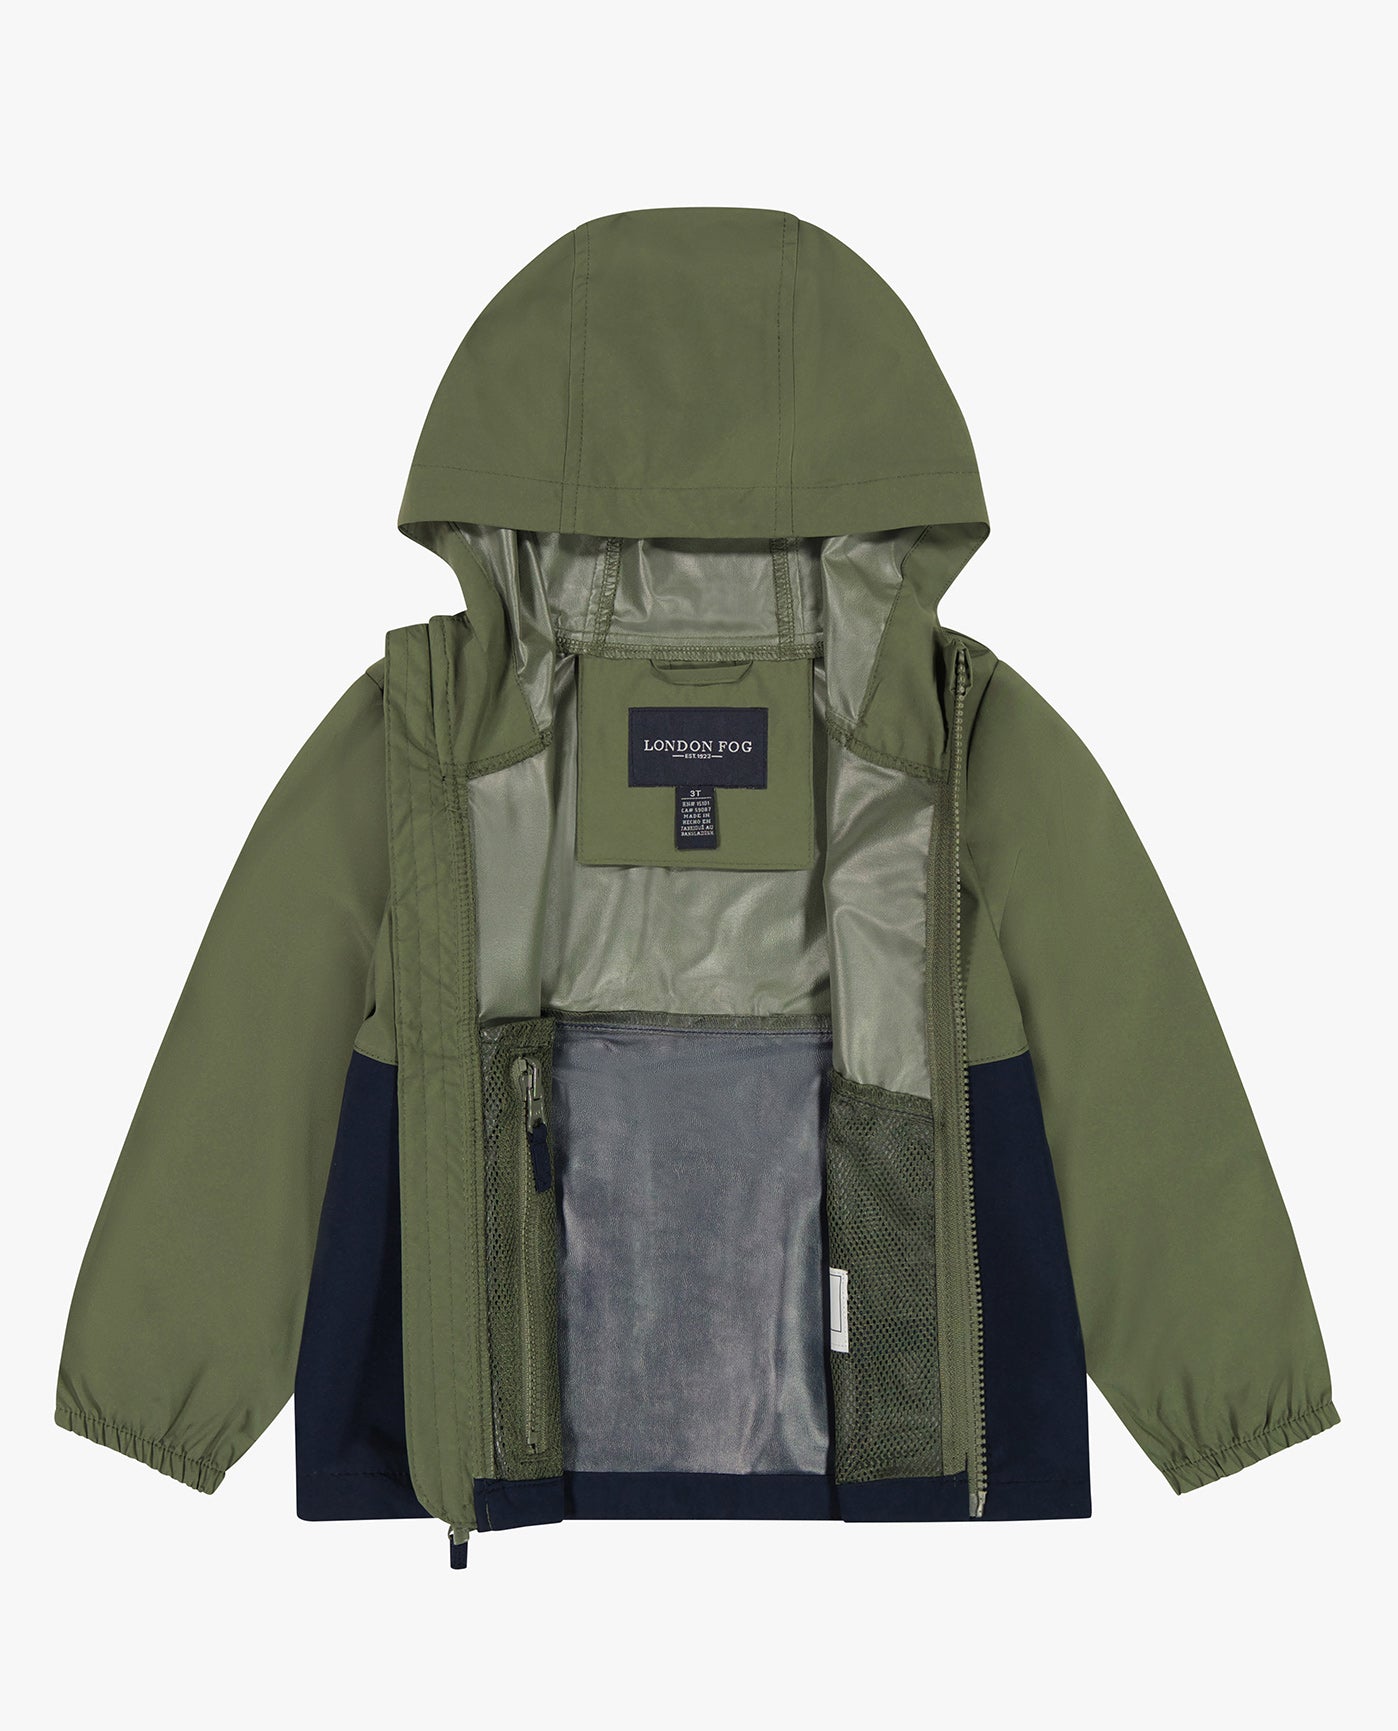 ALT VIEW OF ZIP FRONT HOODED TWO-TONE RAINCOAT | OLIVE DRAB